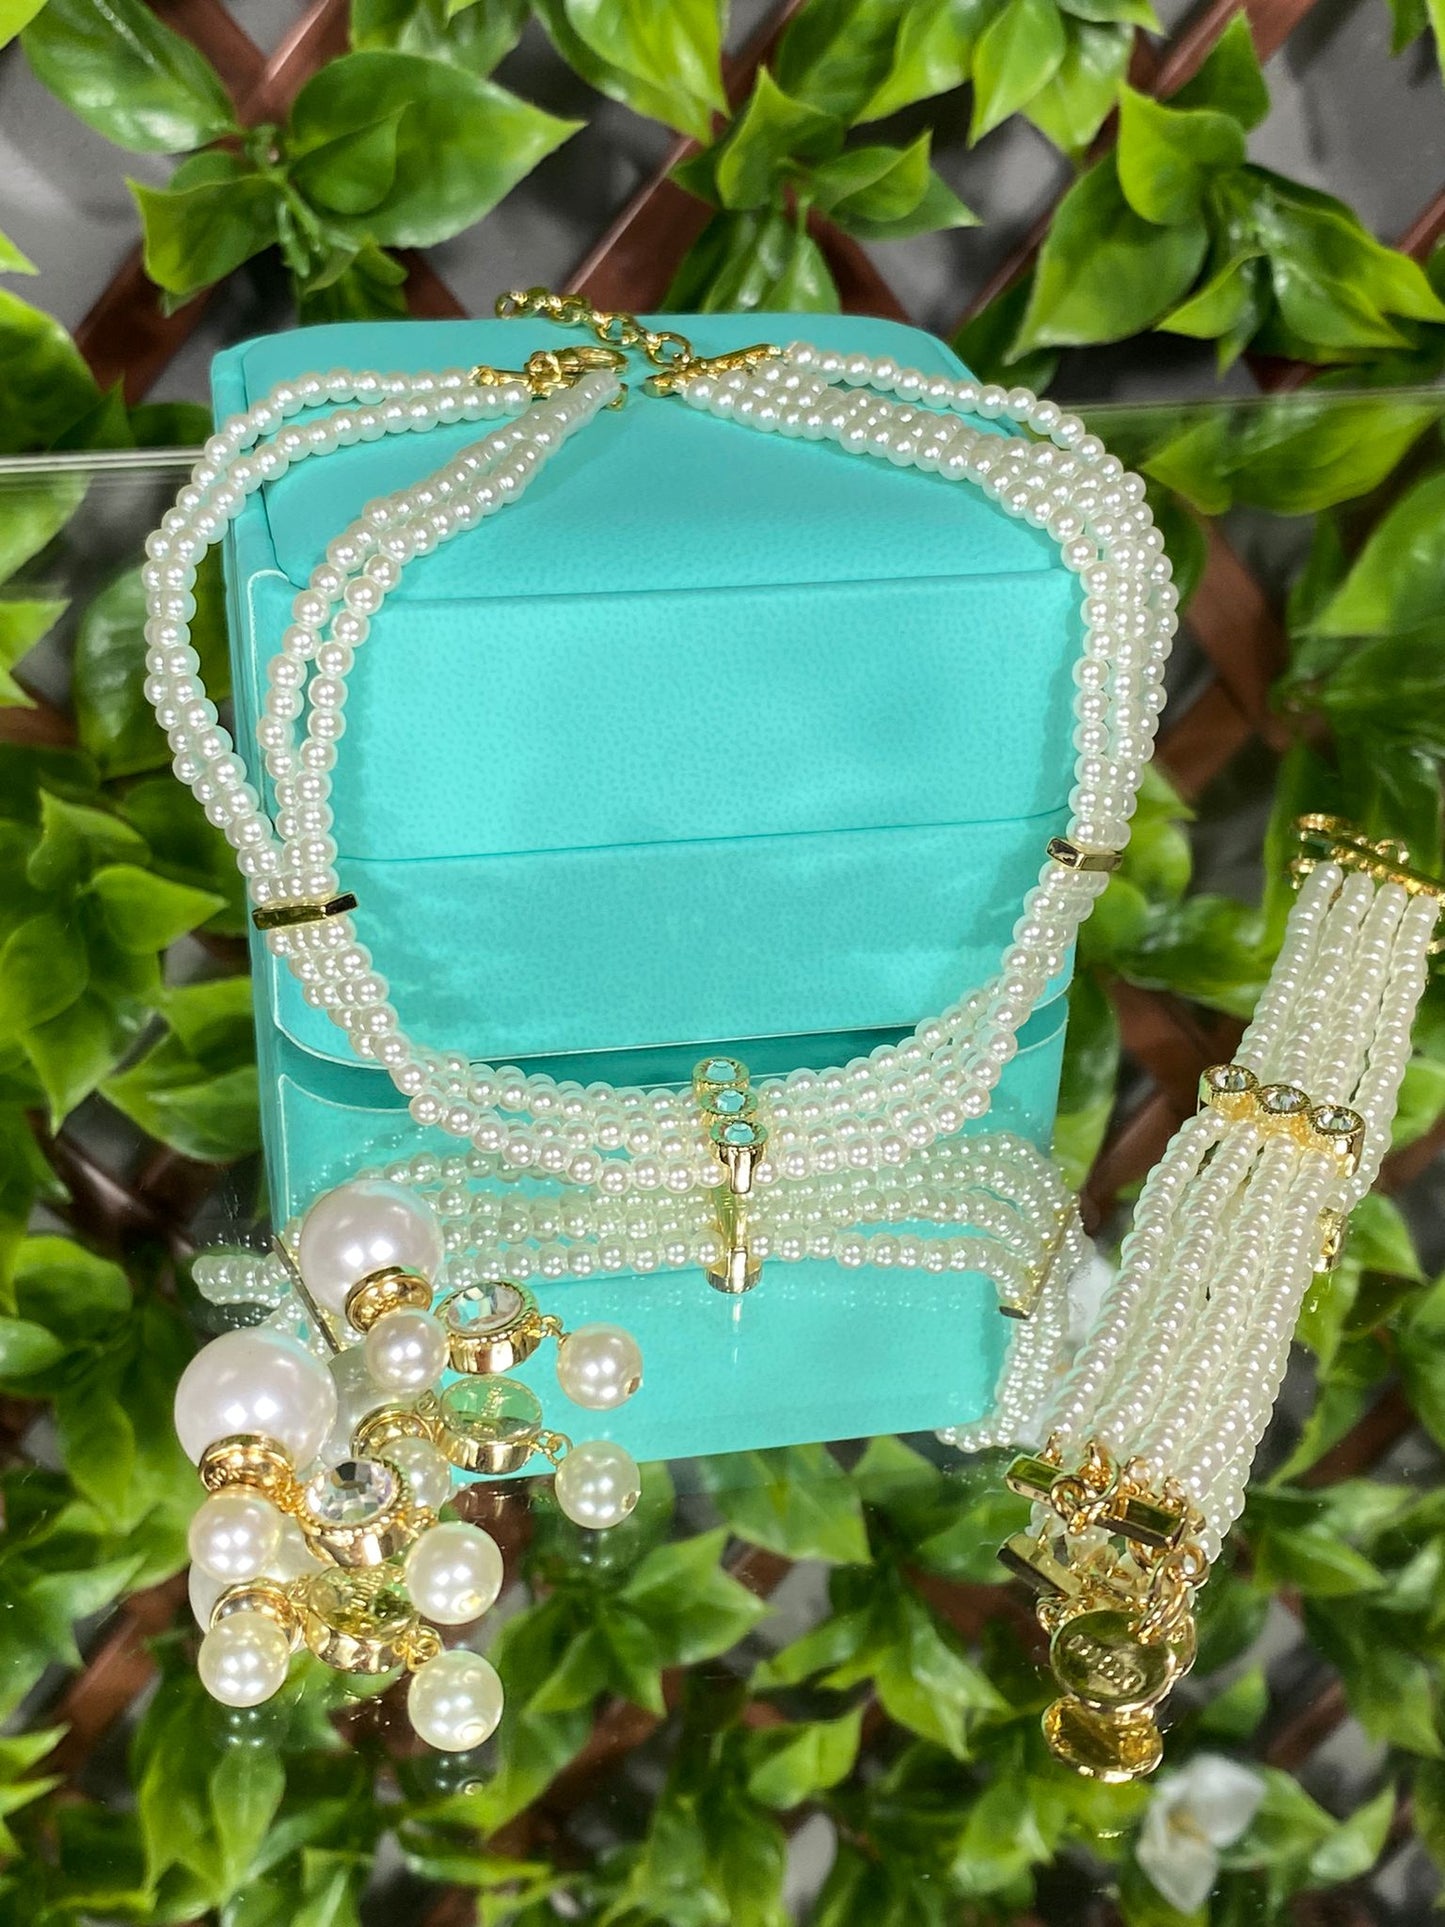 Three pieces, Luxury Jewelry, Pearl Necklace, Bracelet and Earrings